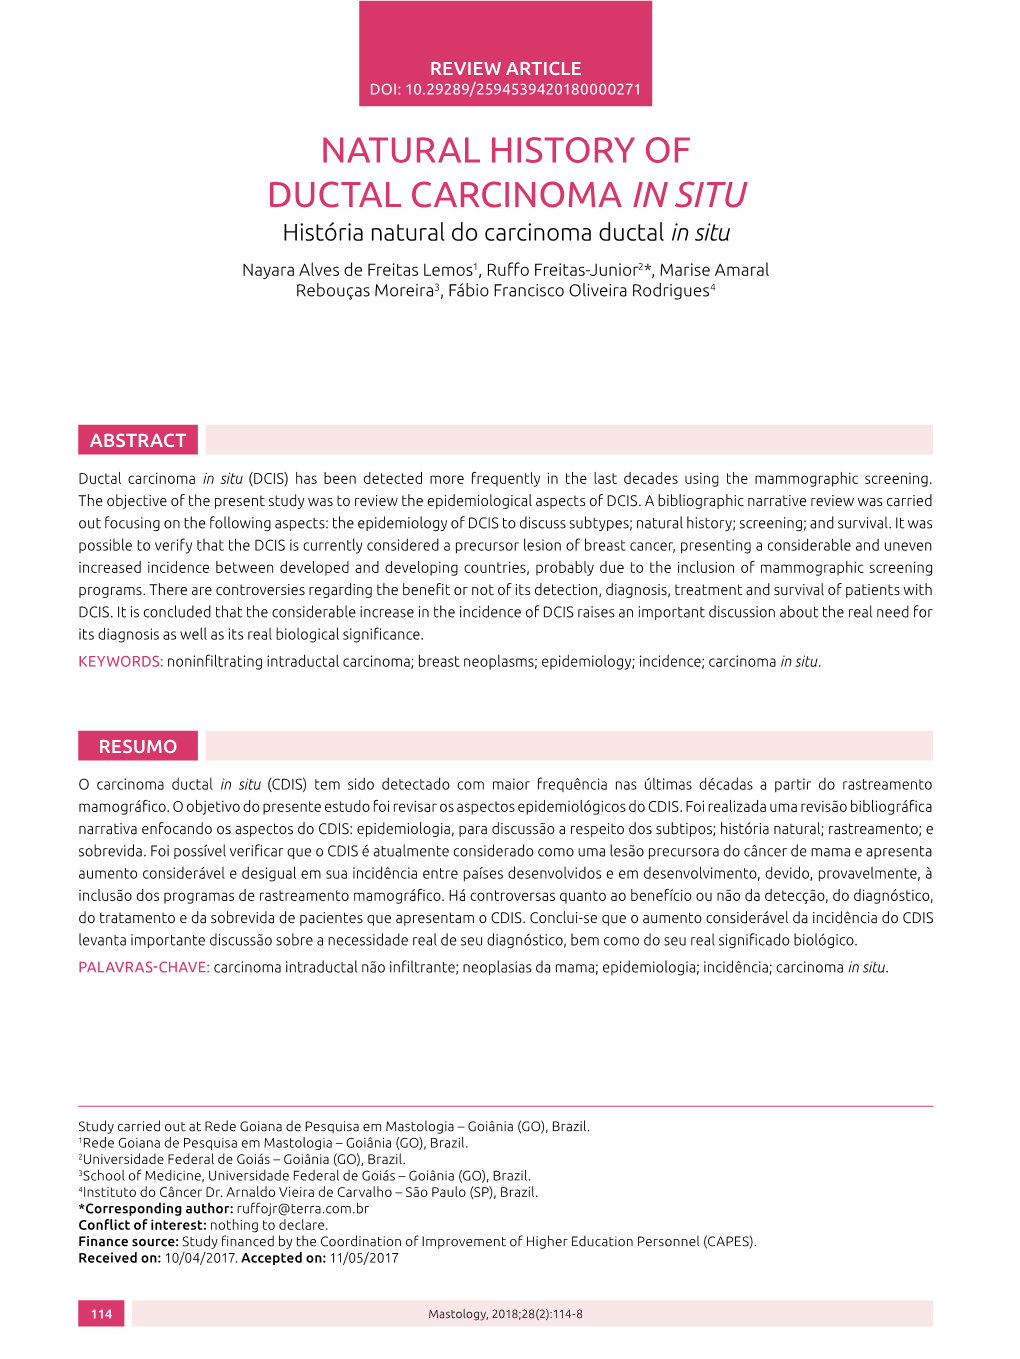 Natural History of Ductal Carcinoma in Situ